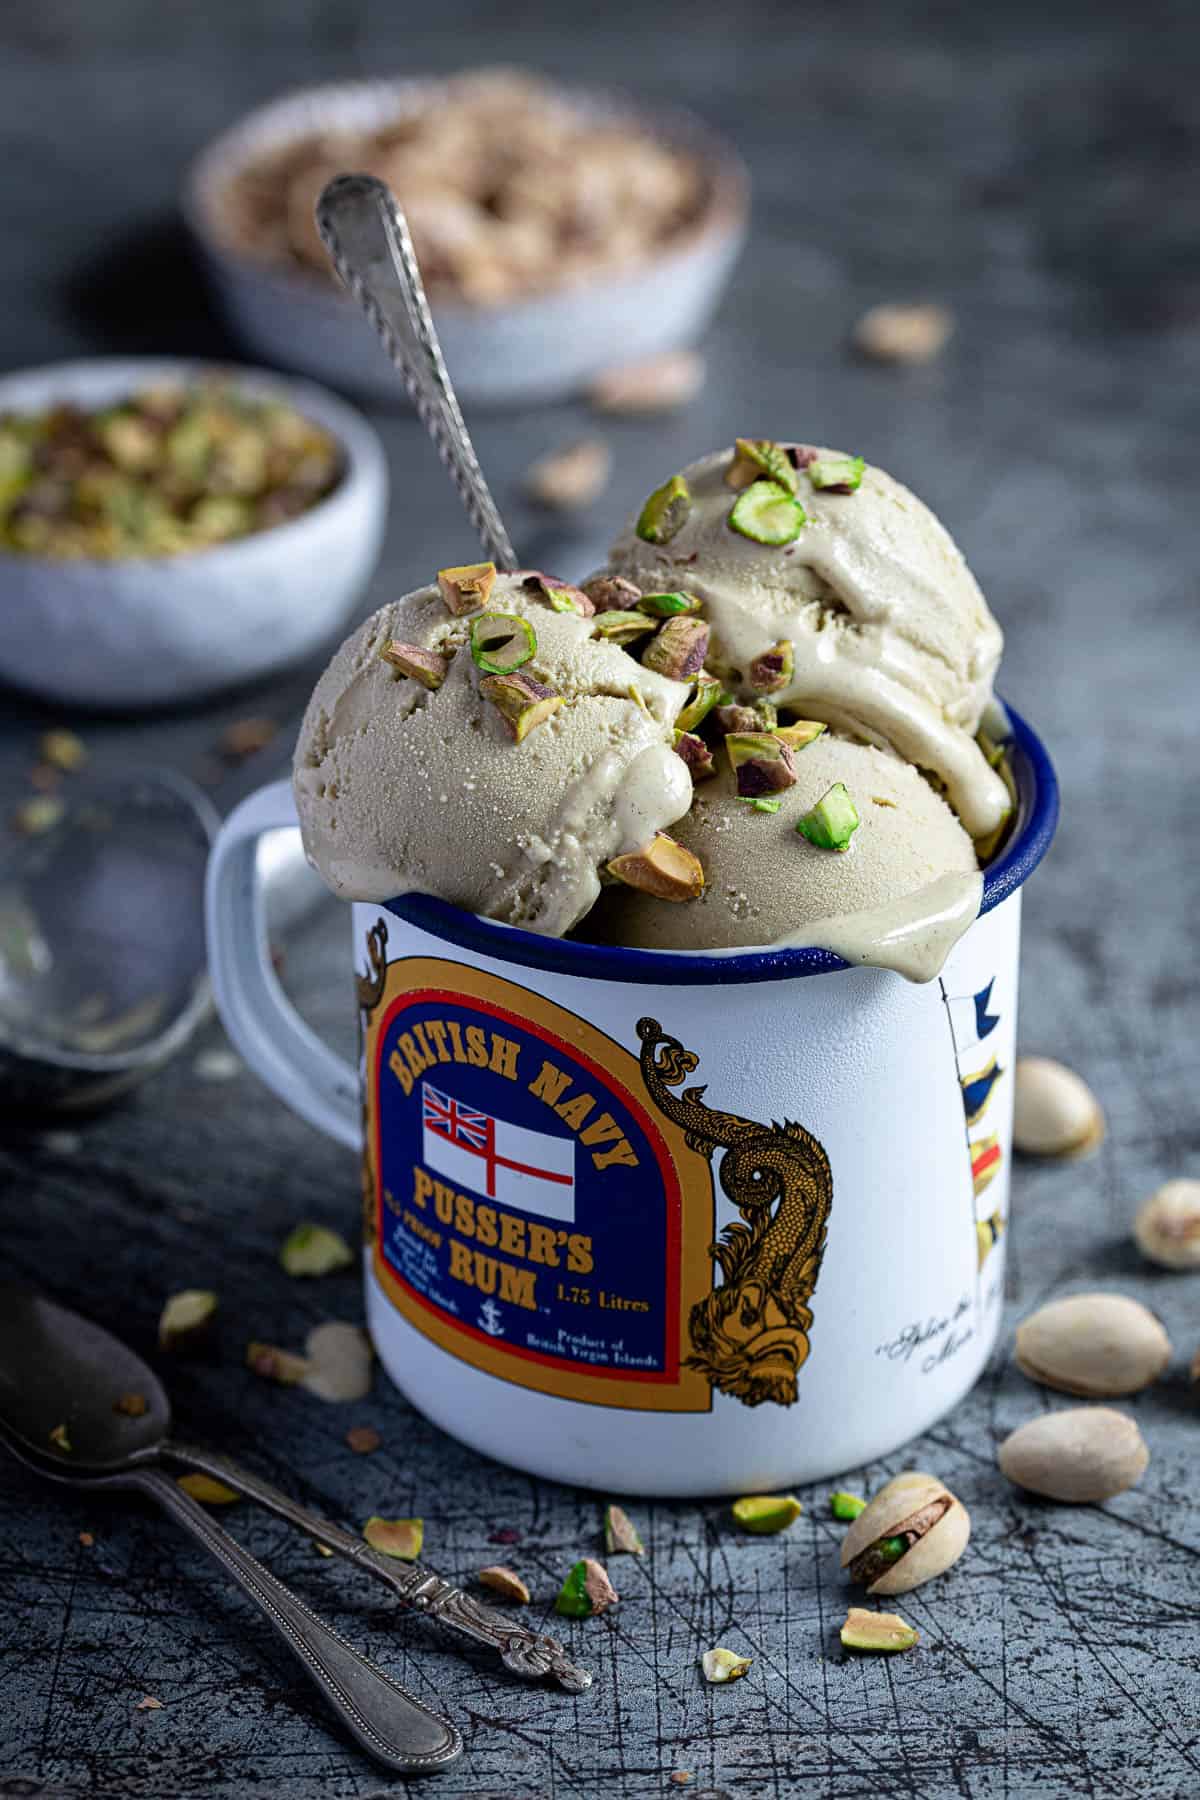 Scoops of vegan pistachio ice cream in an enamel mug with a bowl of chopped pistachios and a bowl of pistachio shells.